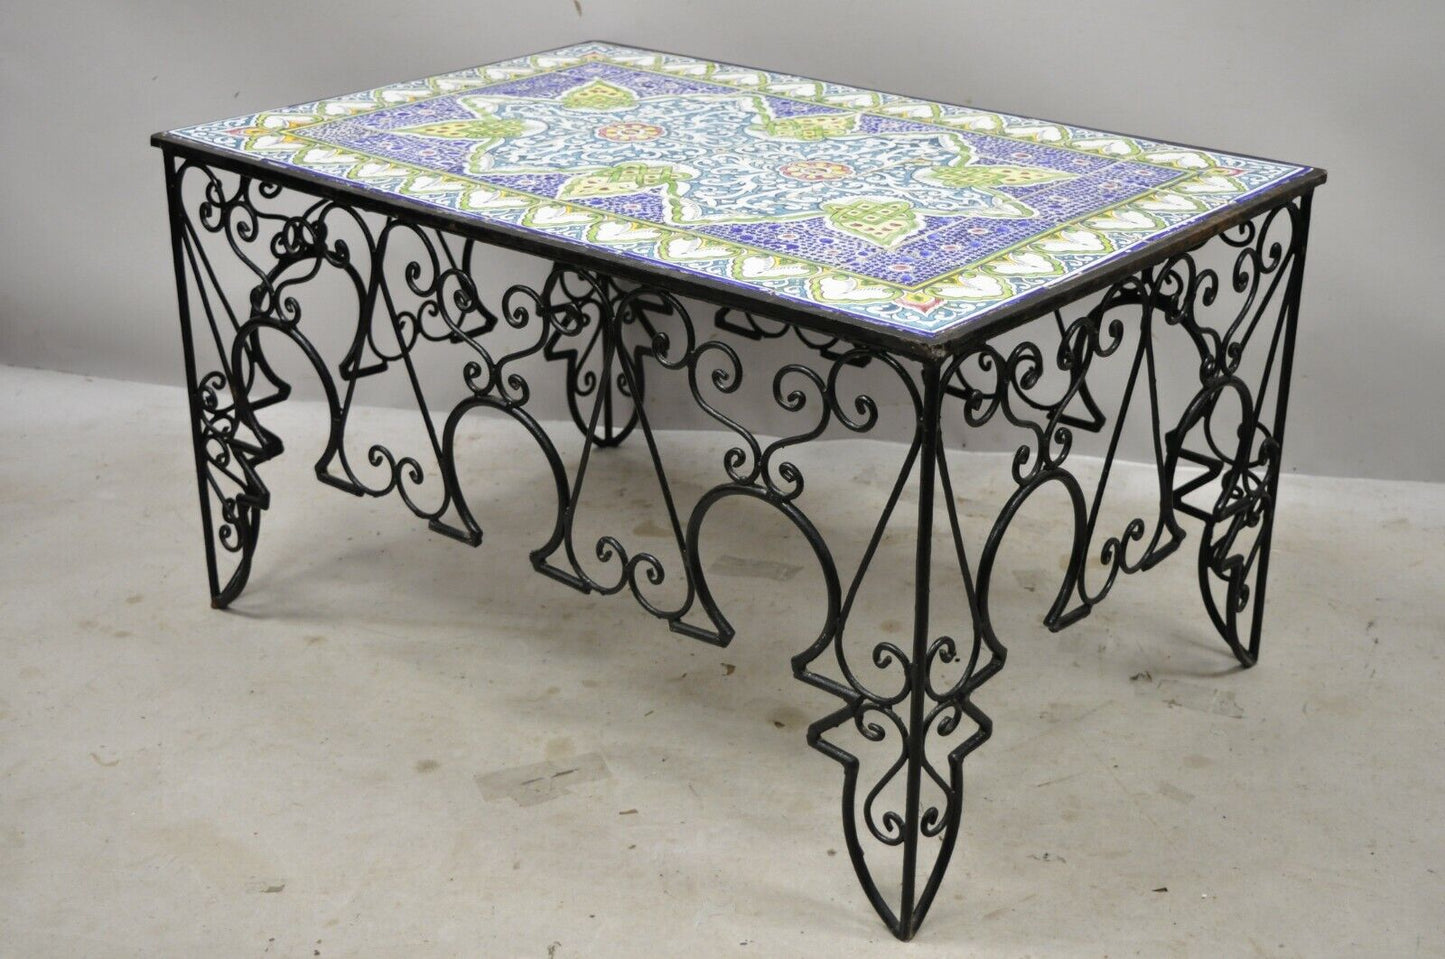 Arts & Crafts Ceramic California Tile Wrought Iron Coffee Table attr. Catalina